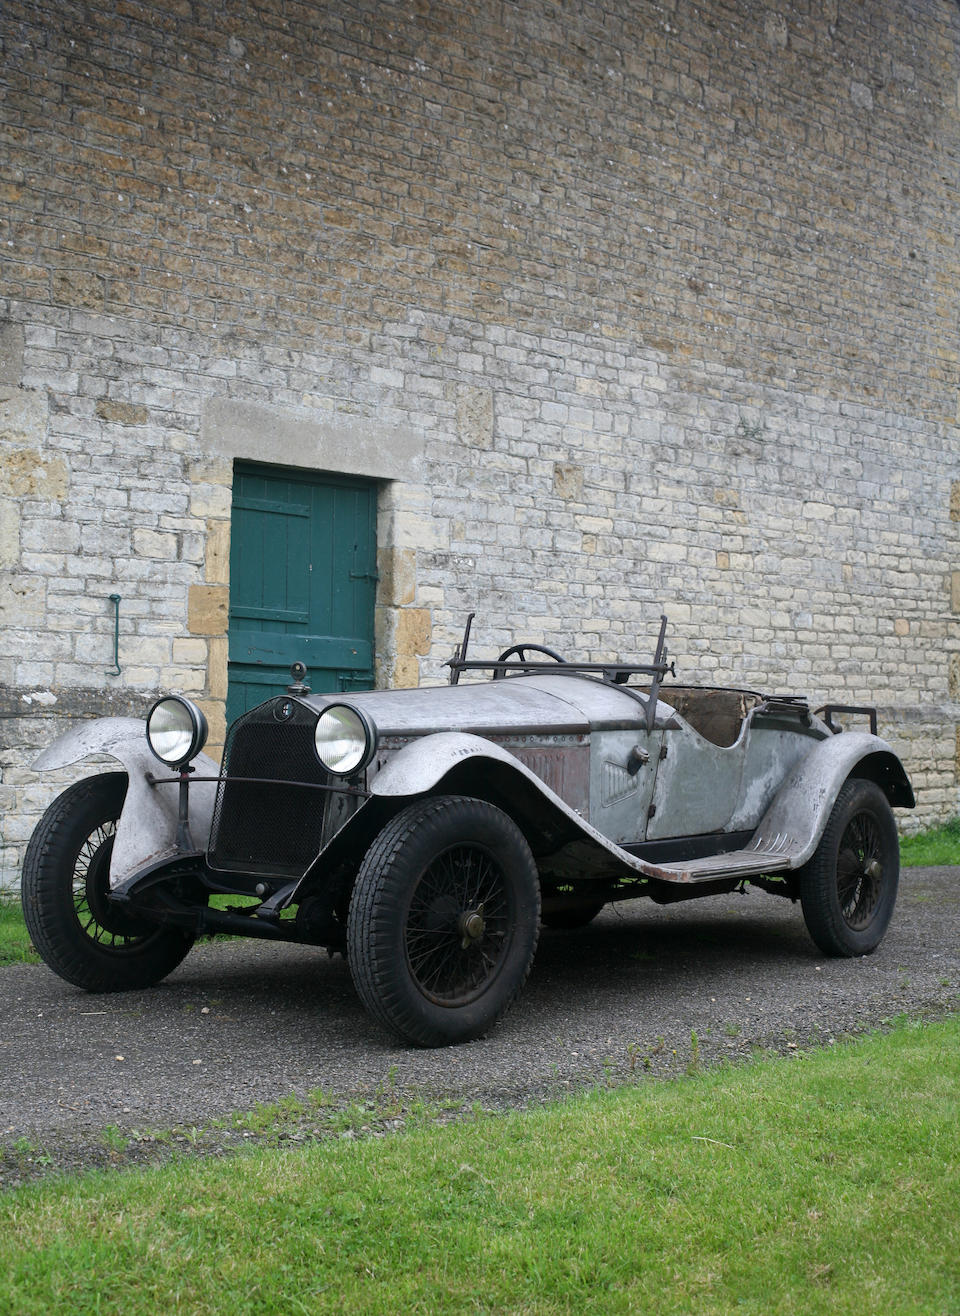 <i>The ex-Baron Philippe de Gunzbourg and Victor Polledry</i><br /><b>1931 Alfa Romeo 6C 1750 Supercharged Gran Sport Spider  </b><br />Chassis no. 10814356 <br />Engine no. 10814356